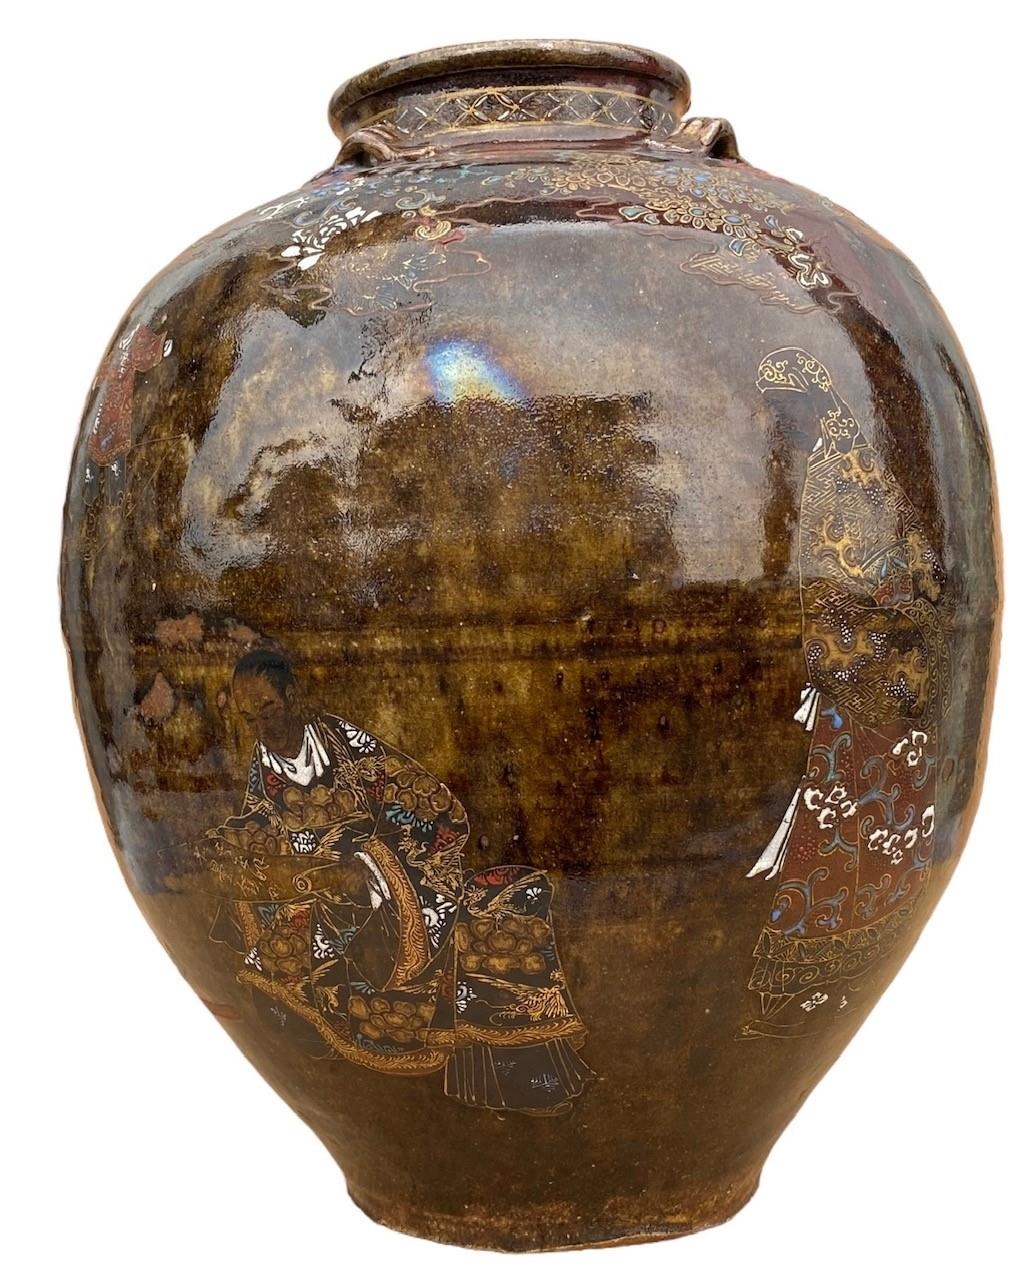 A LARGE 19TH CENTURY JAPANESE TEA JAR Decorated with painted enamel, gold figures and flowers, - Image 2 of 6